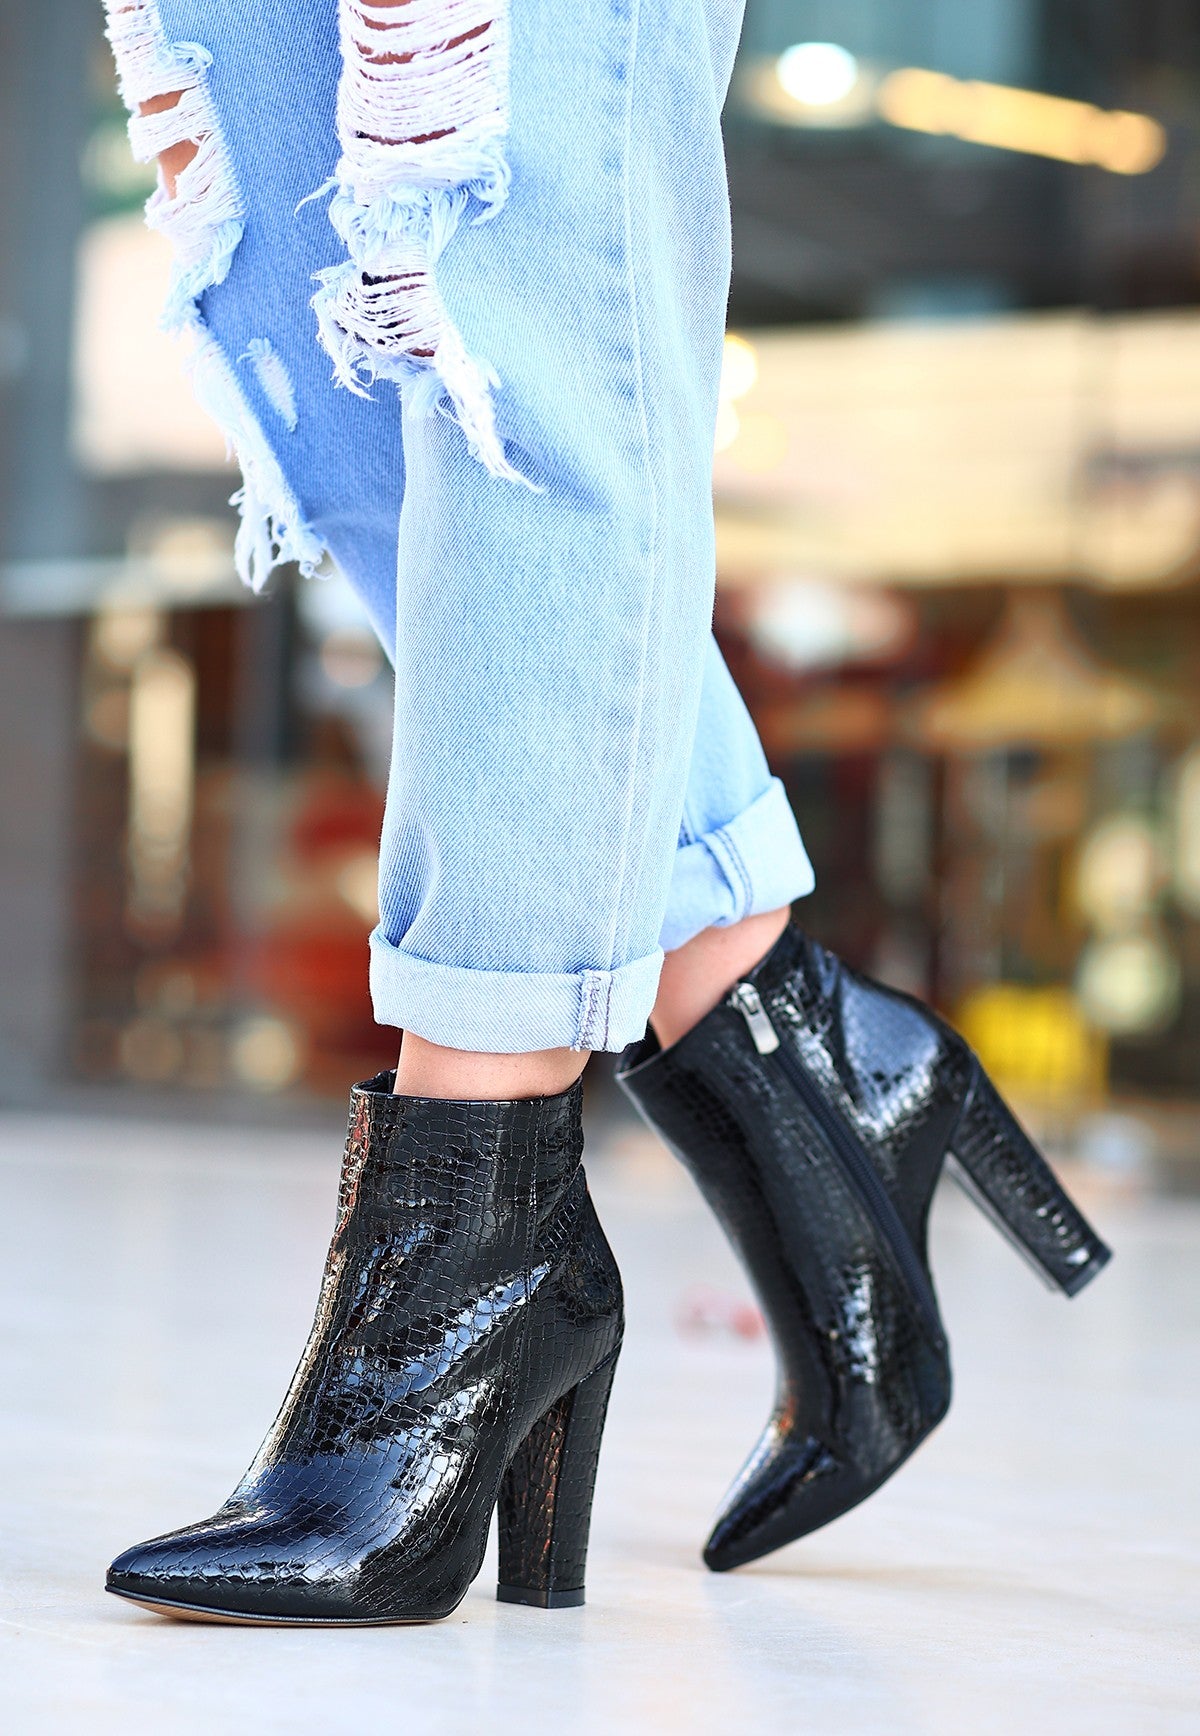 Women's Black Patent Leather Patterned Heeled Boots - STREETMODE ™